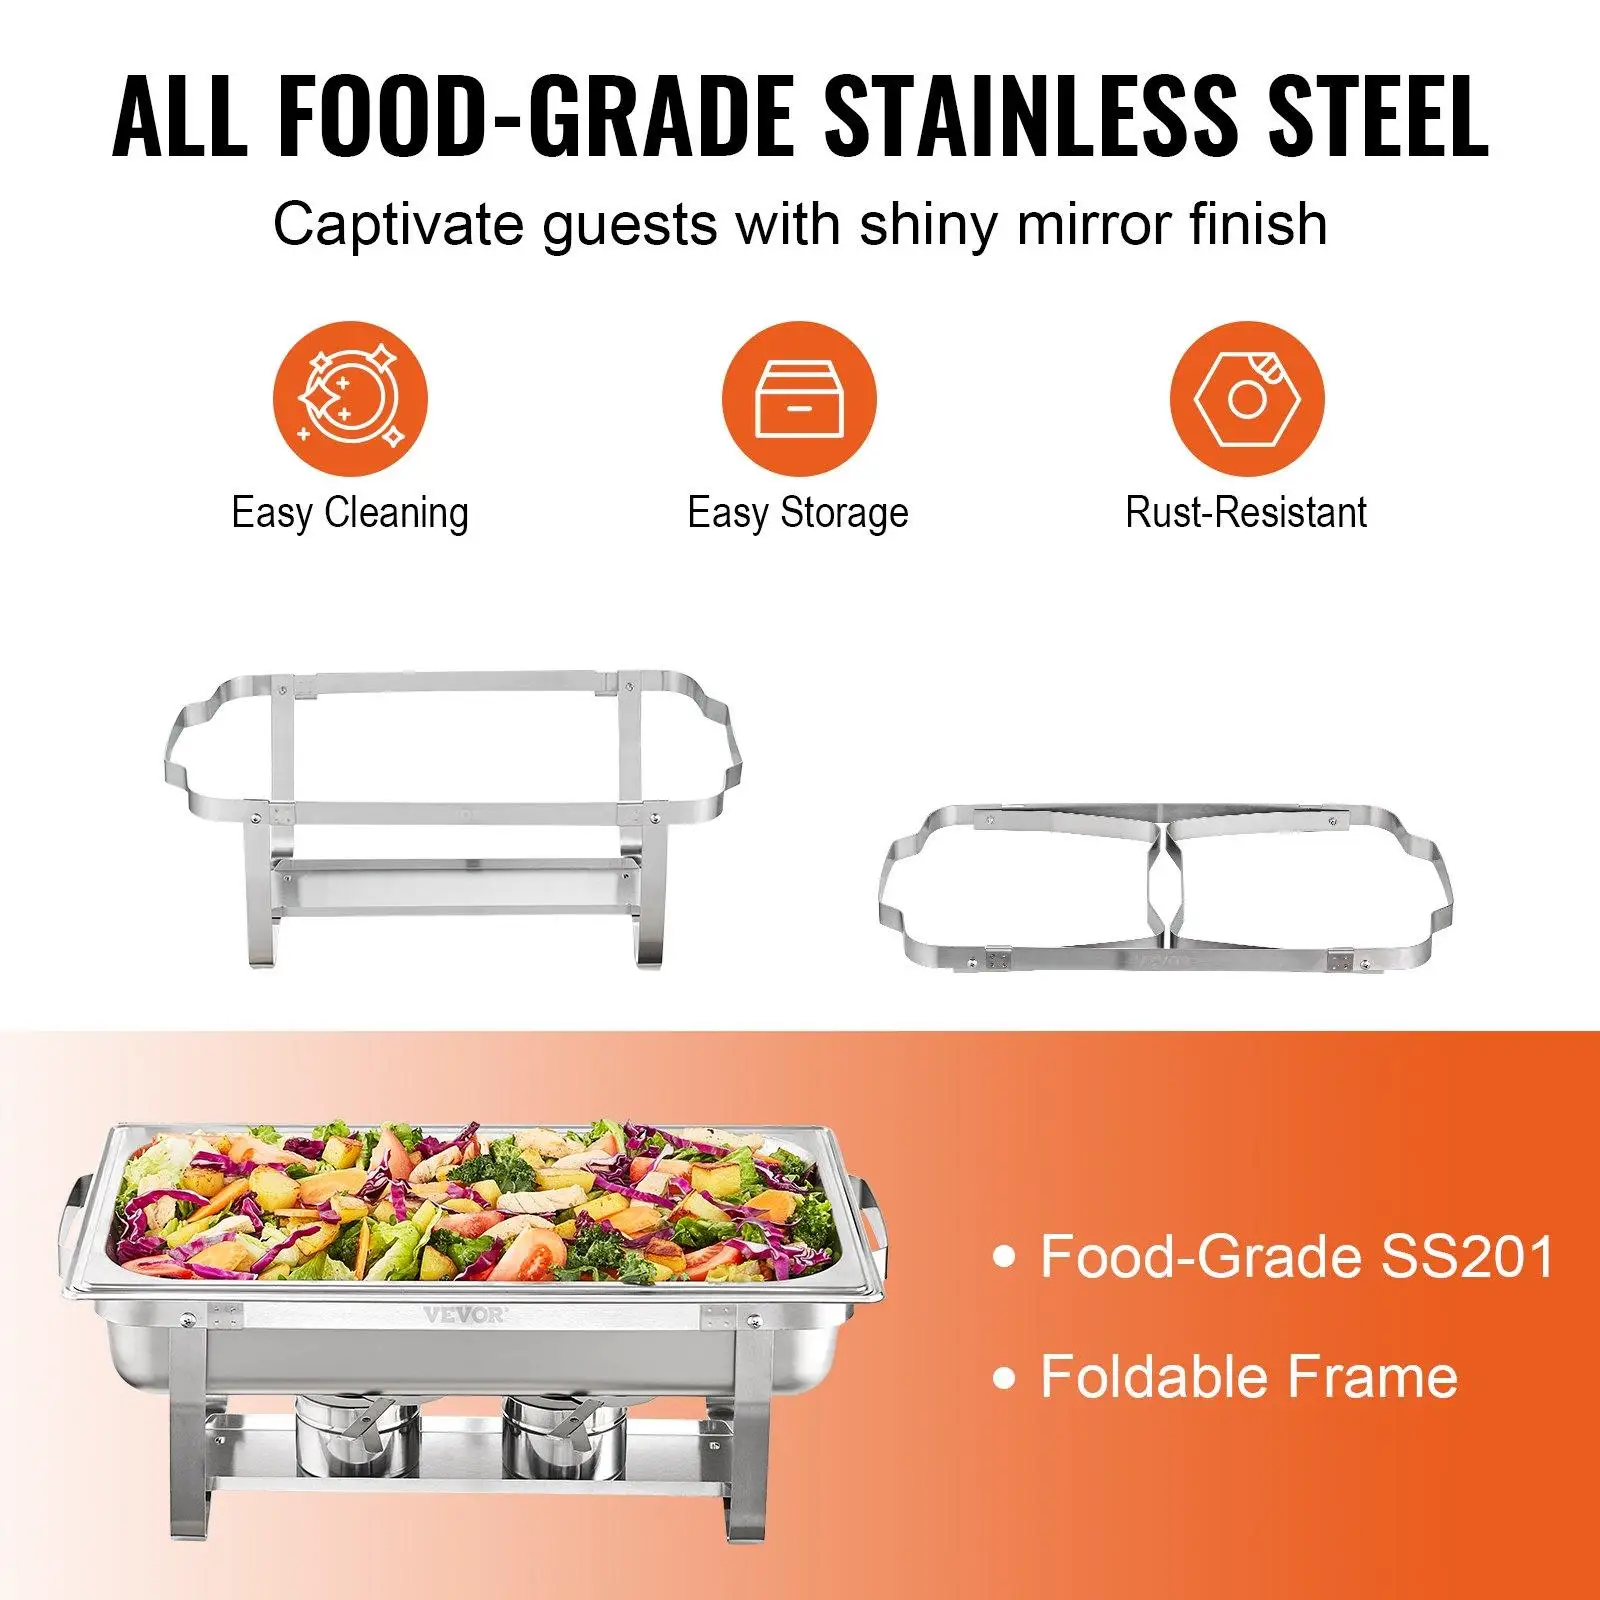 food-grade stainless steel material